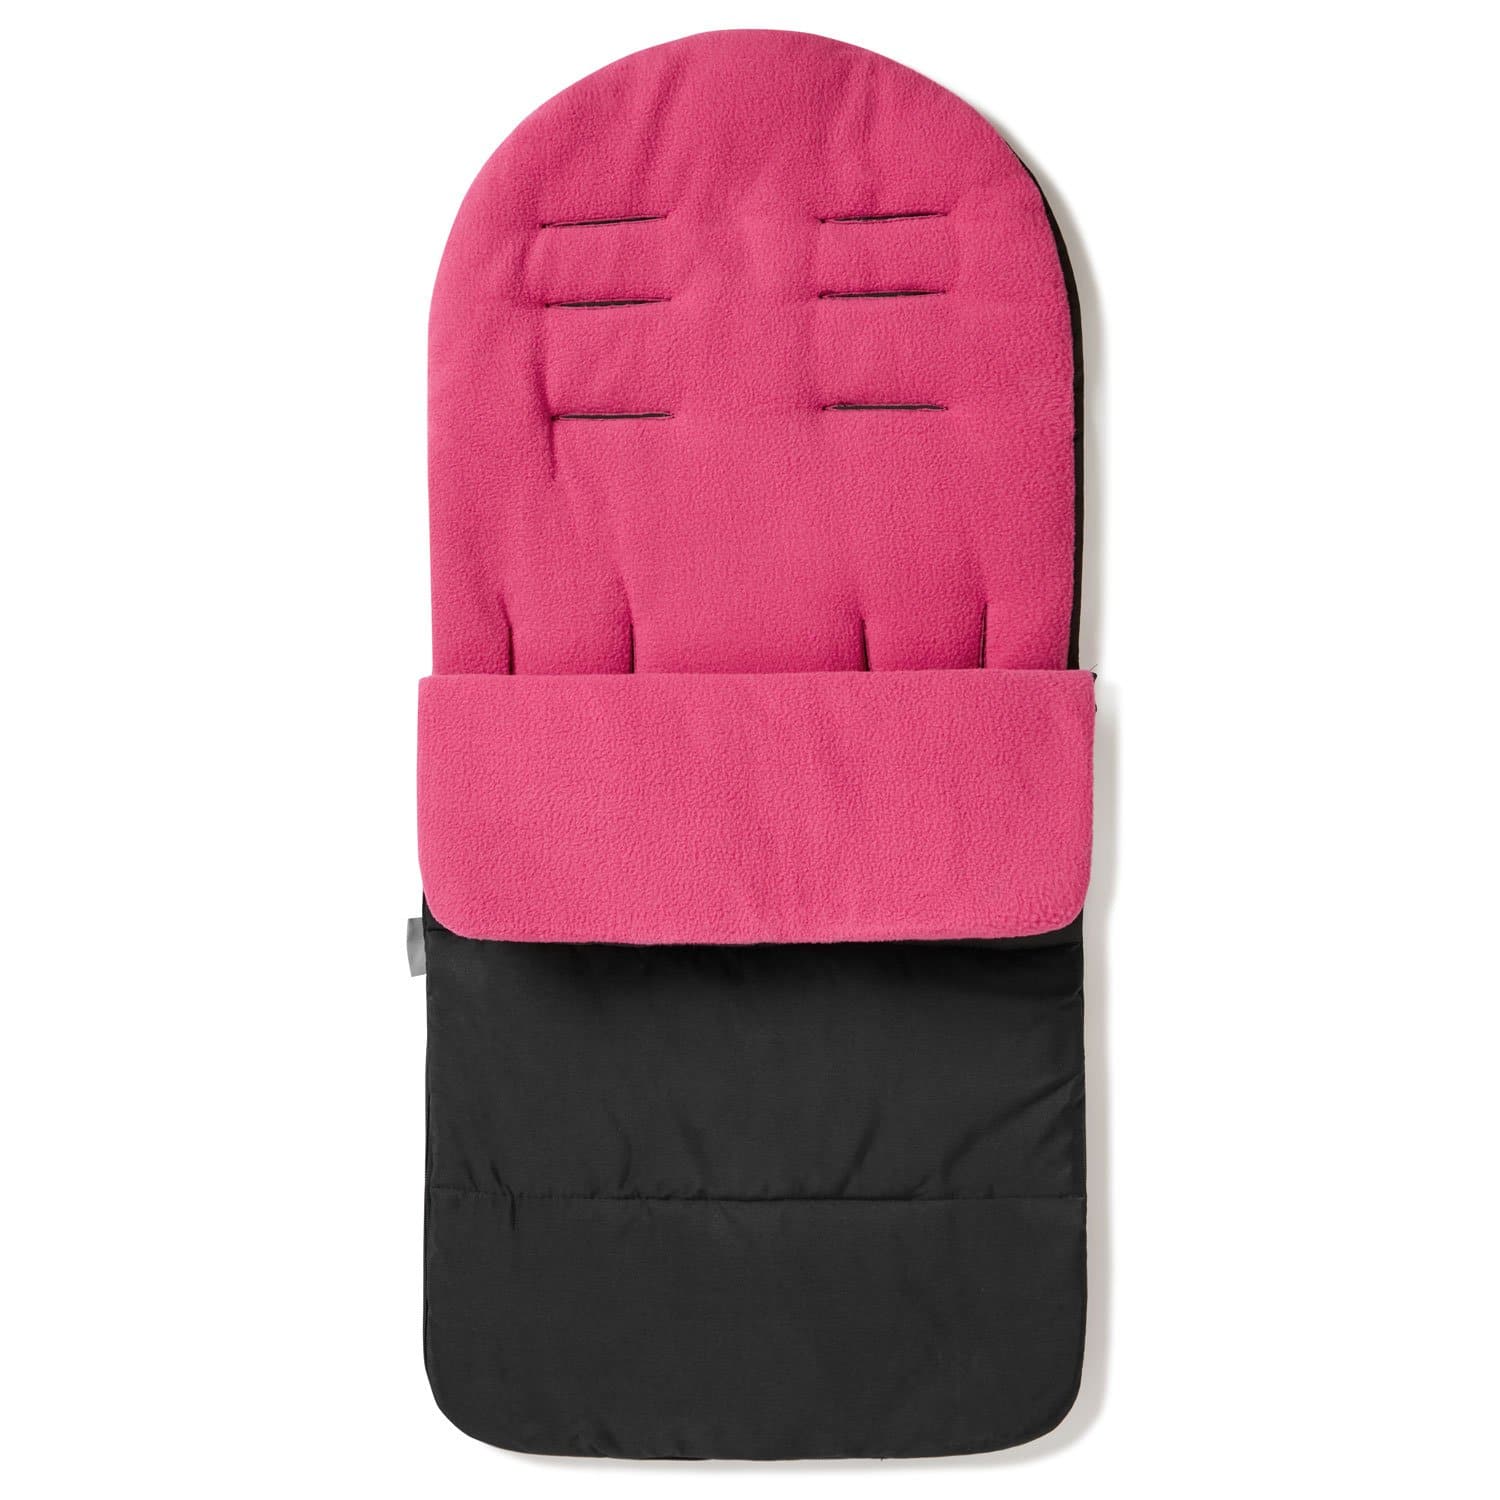 Premium Footmuff / Cosy Toes Compatible with Hybrid - For Your Little One